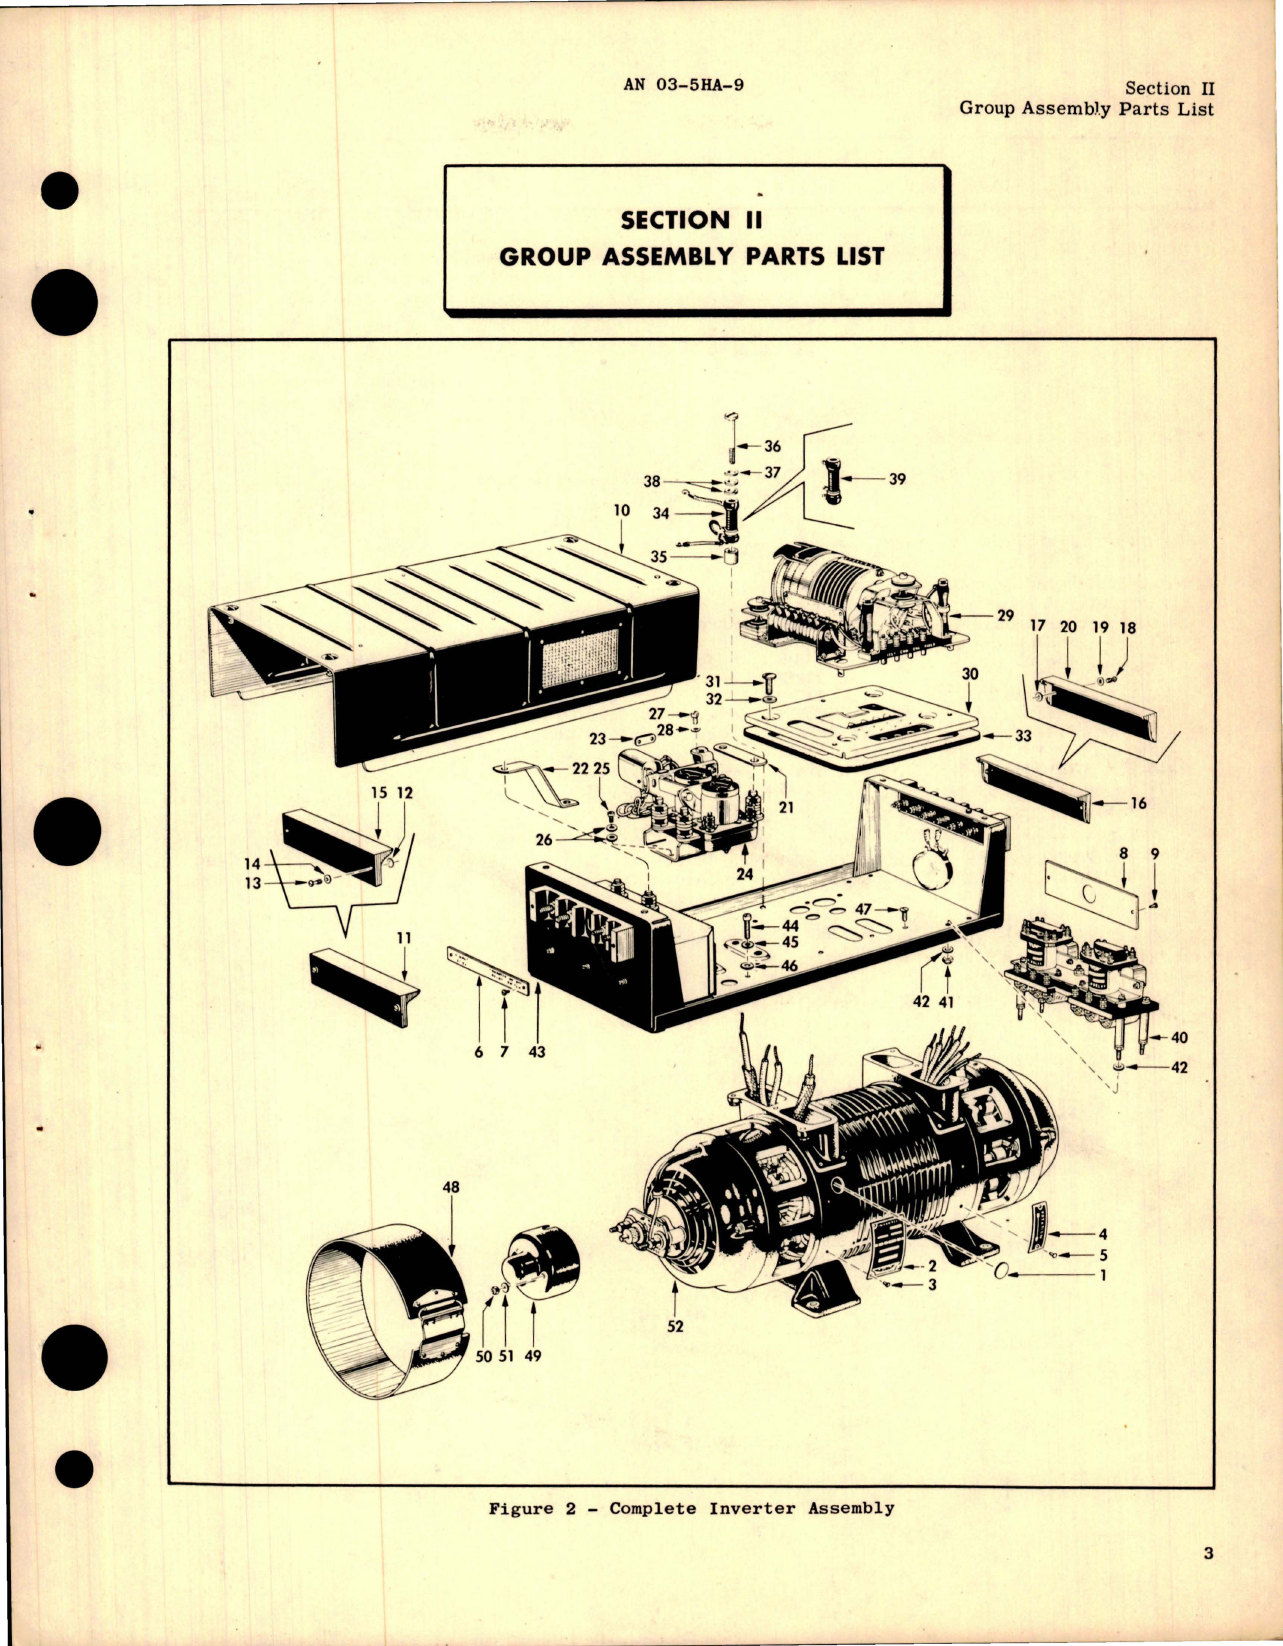 Sample page 7 from AirCorps Library document: Illustrated Parts Breakdown for Inverters - Models F45-3, F36-3, F36-3M and E1725-1